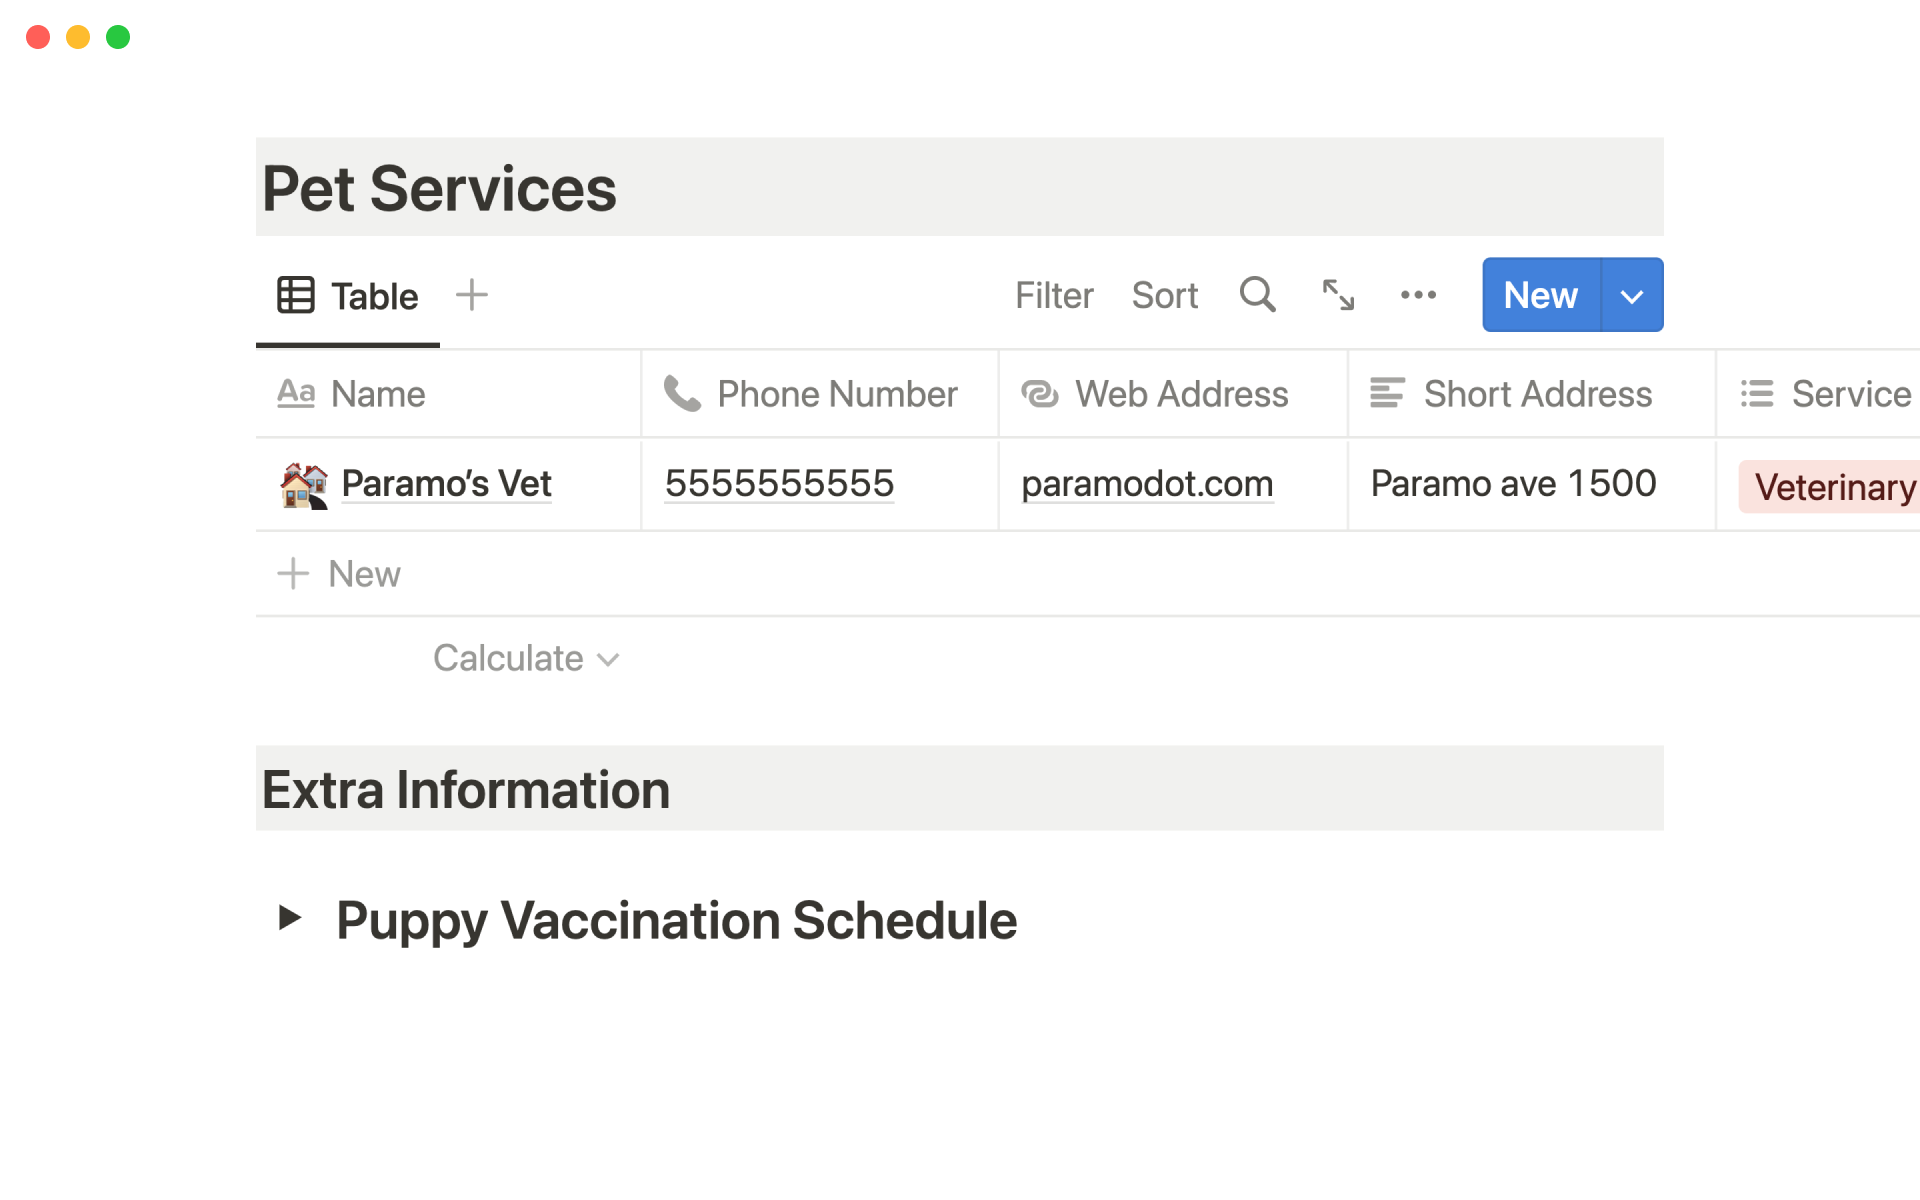 Keep track of pet grooming, vaccinations, and more!